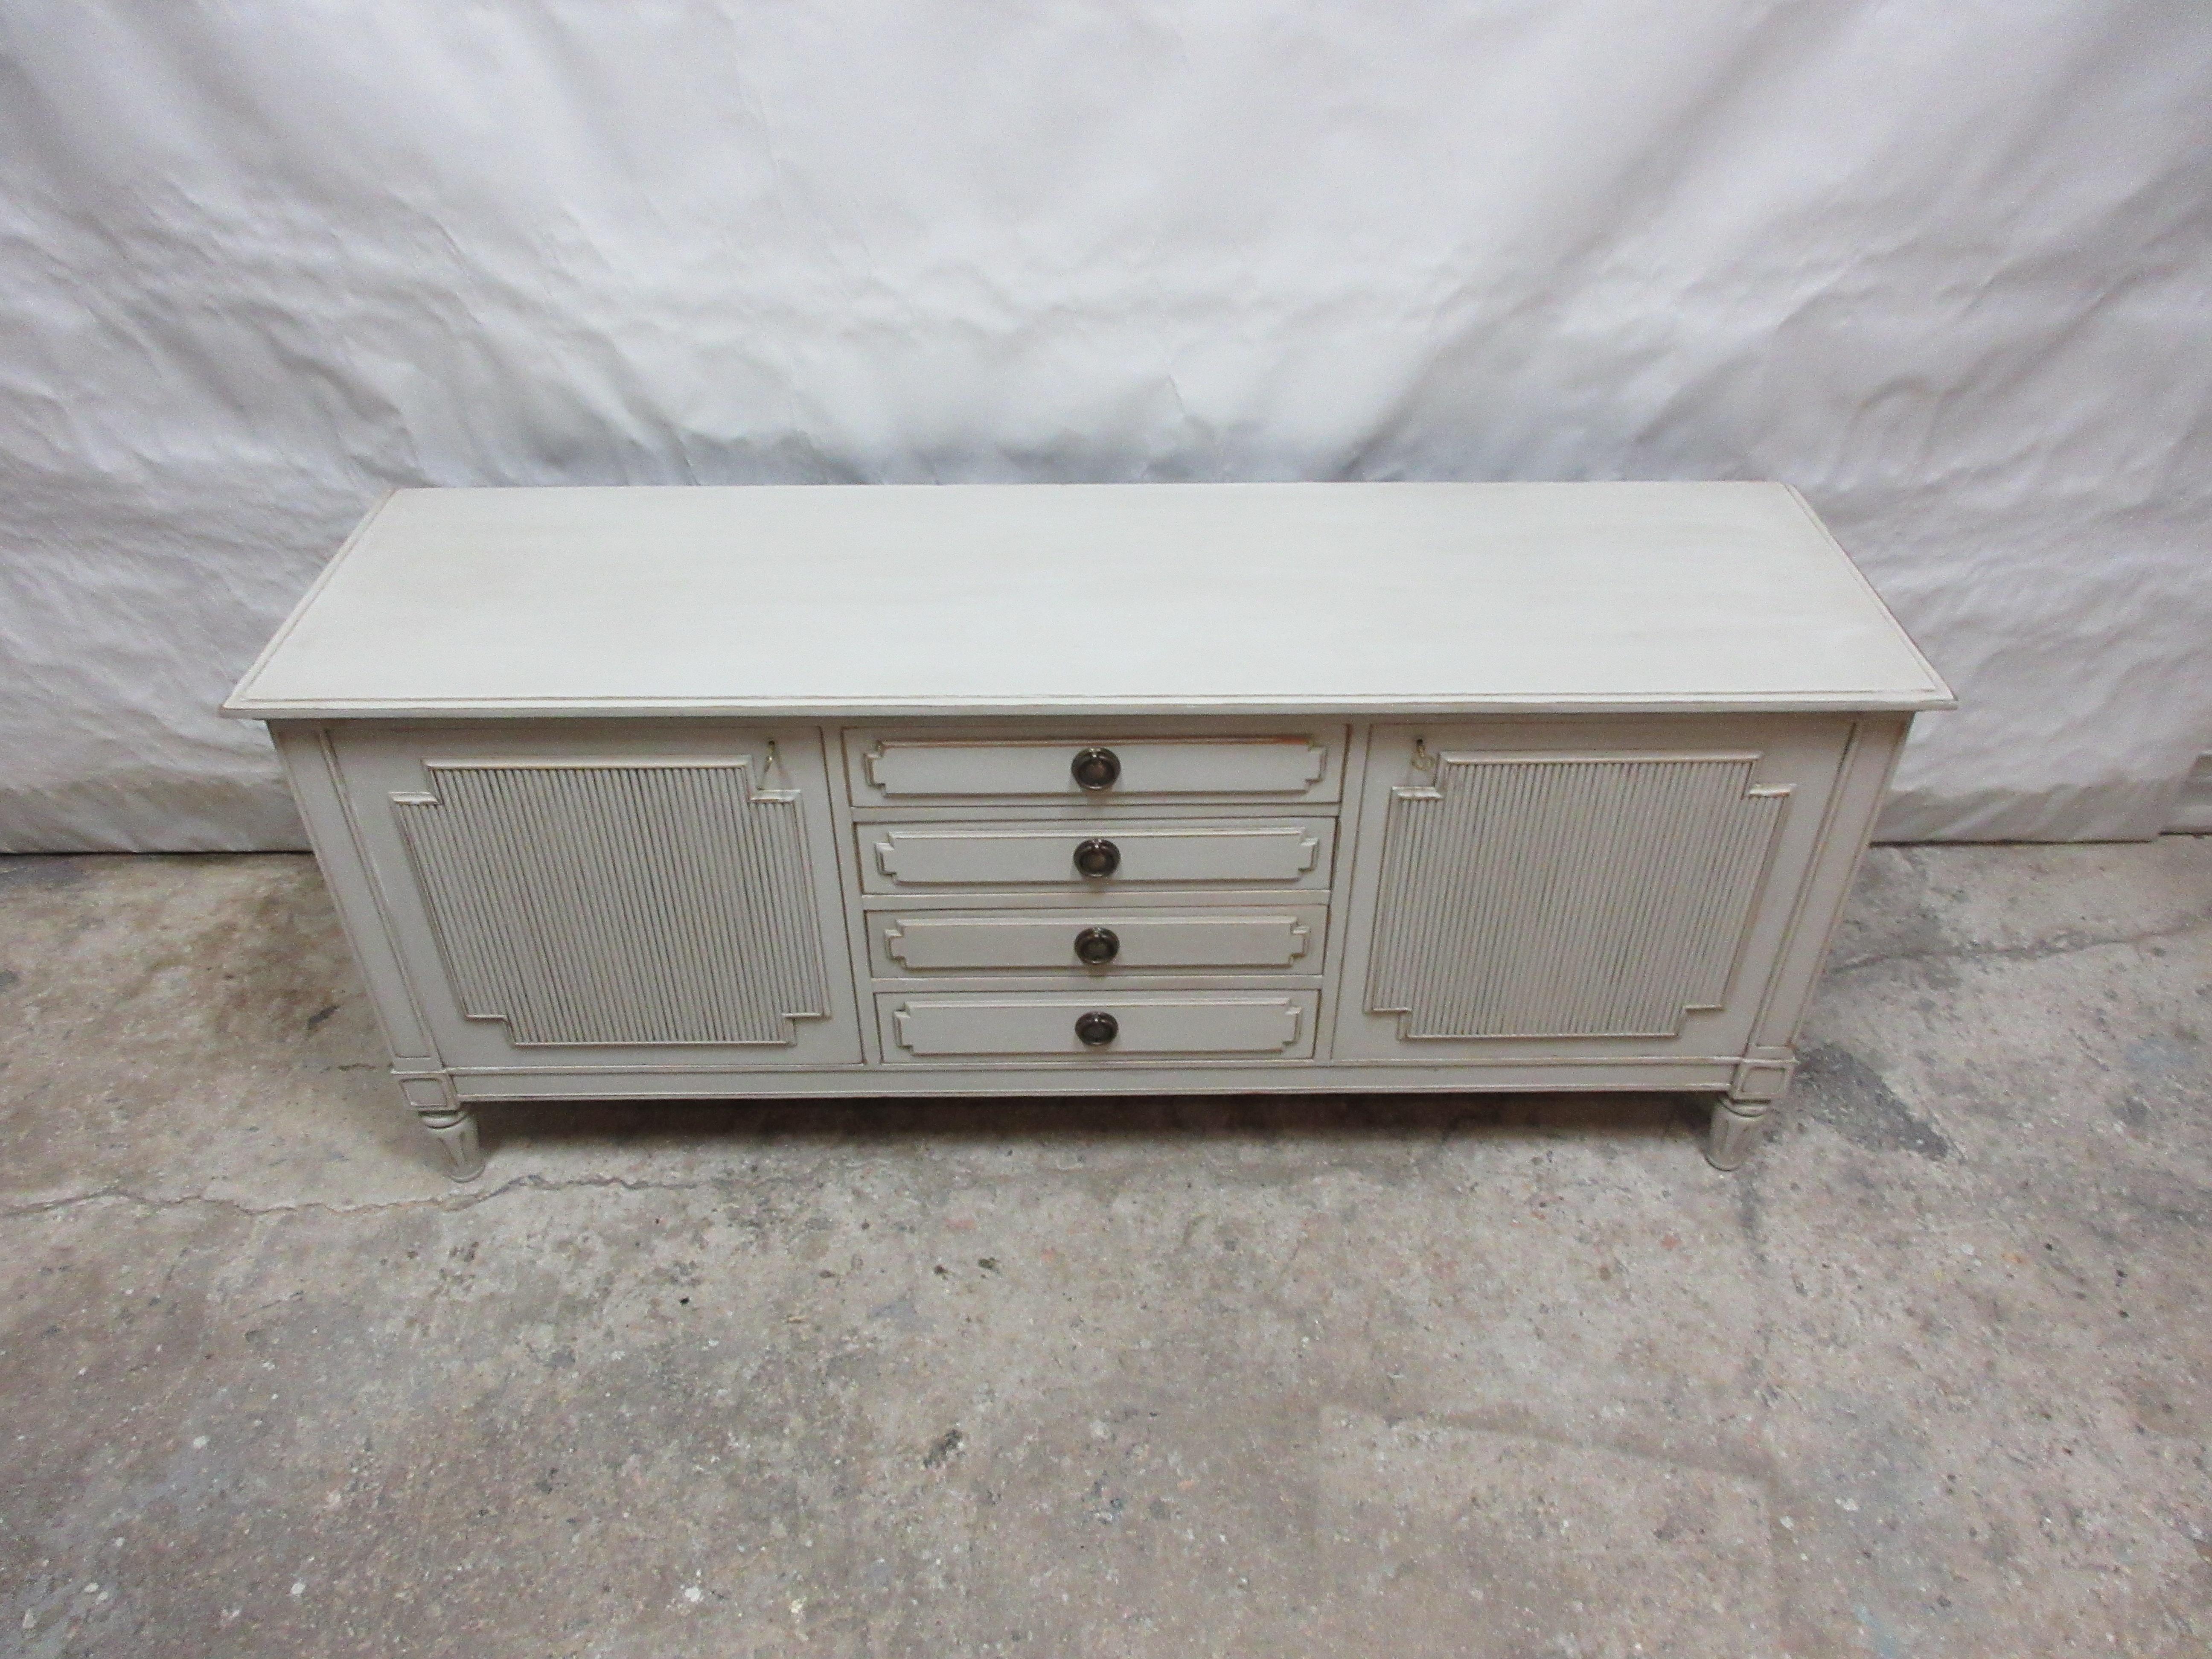 This is a Swedish Gustavian Style Sideboard, its been restored and repainted with Milk Paints 